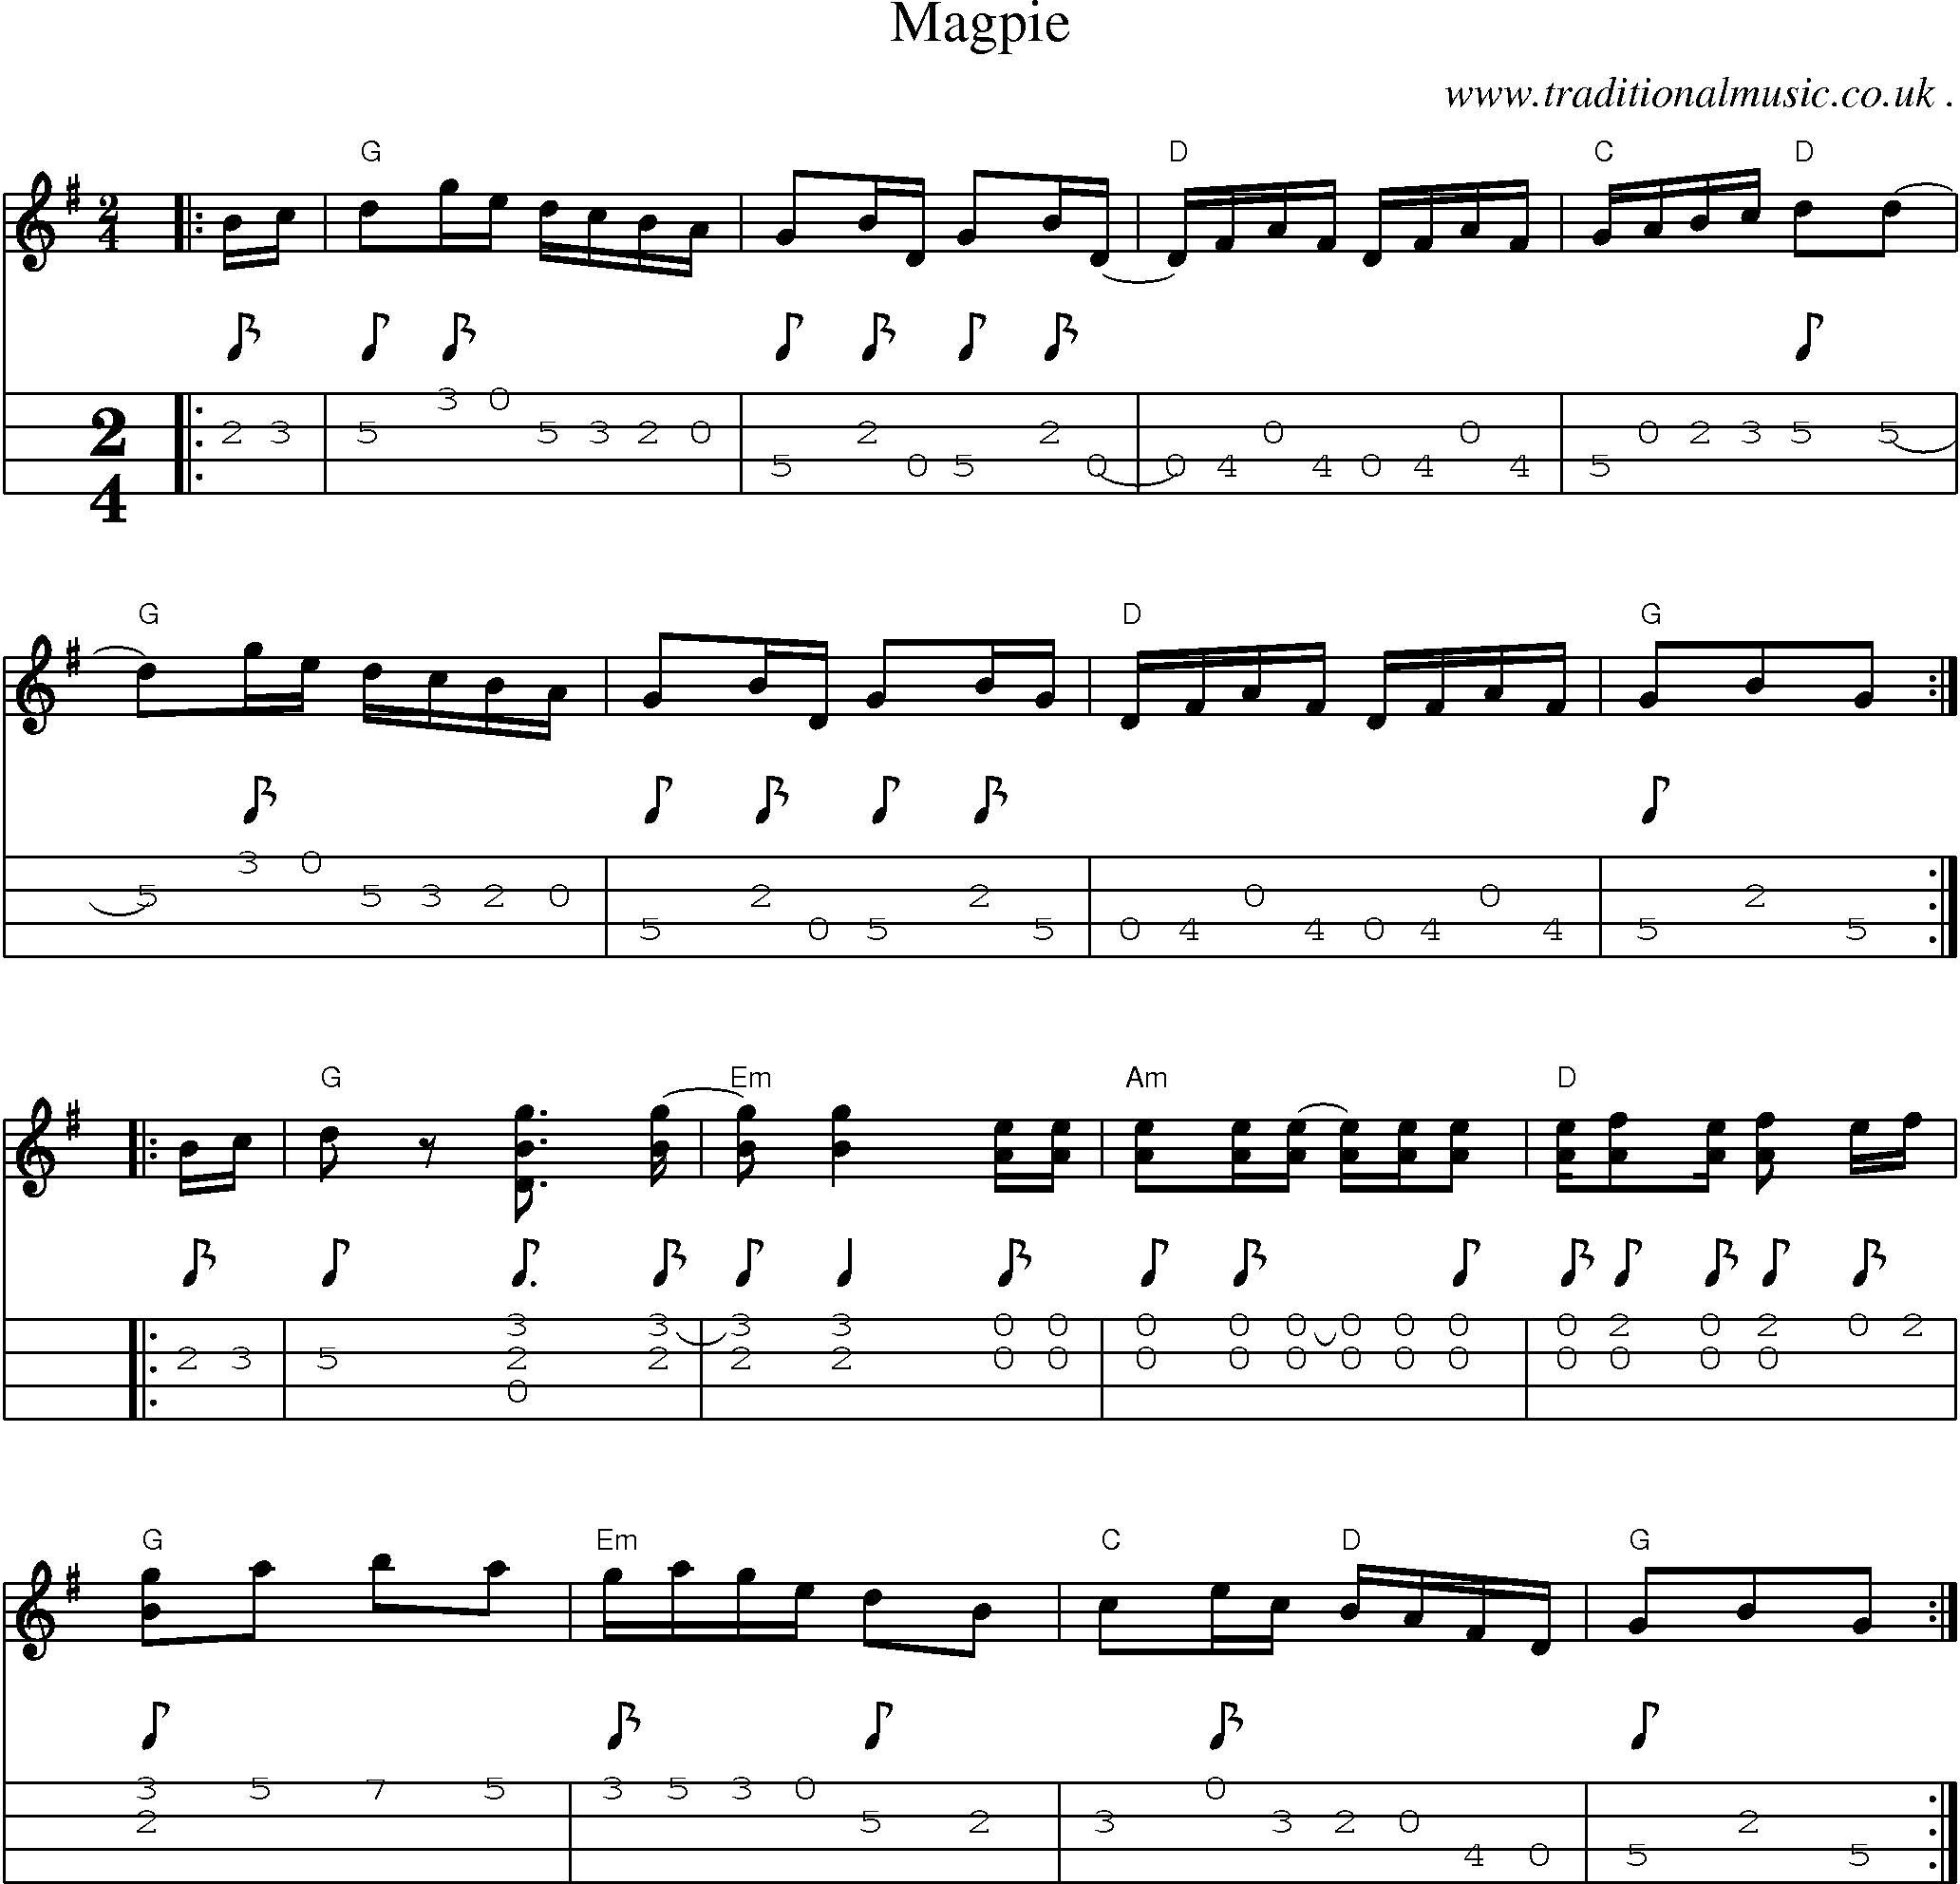 Music Score and Guitar Tabs for Magpie